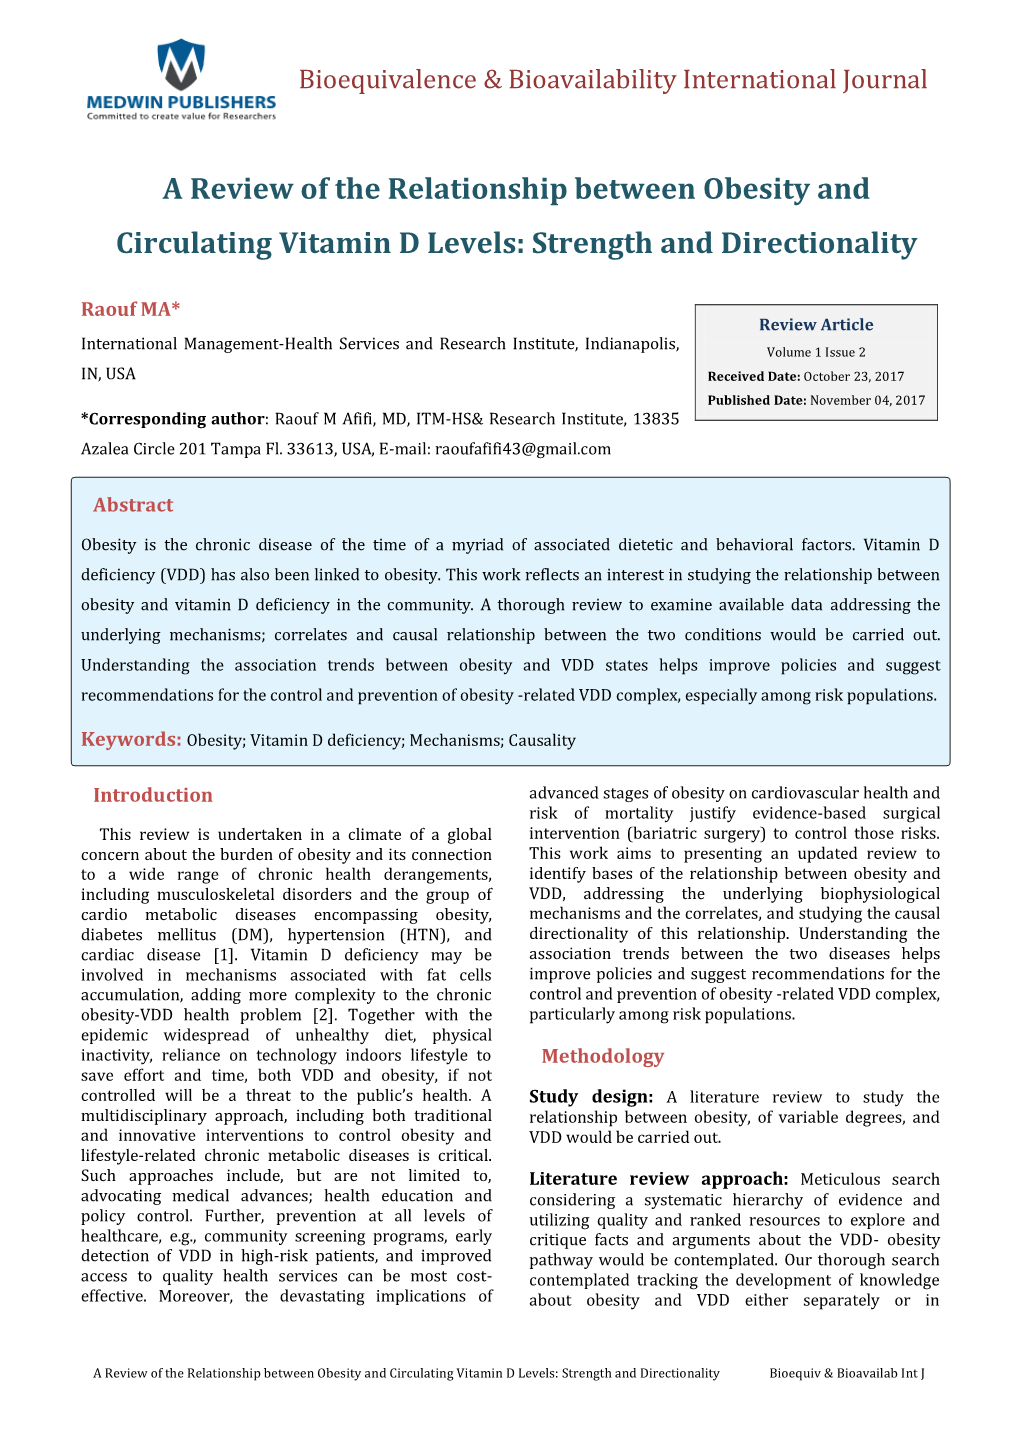 A Review of the Relationship Between Obesity and Circulating Vitamin D Levels: Strength and Directionality